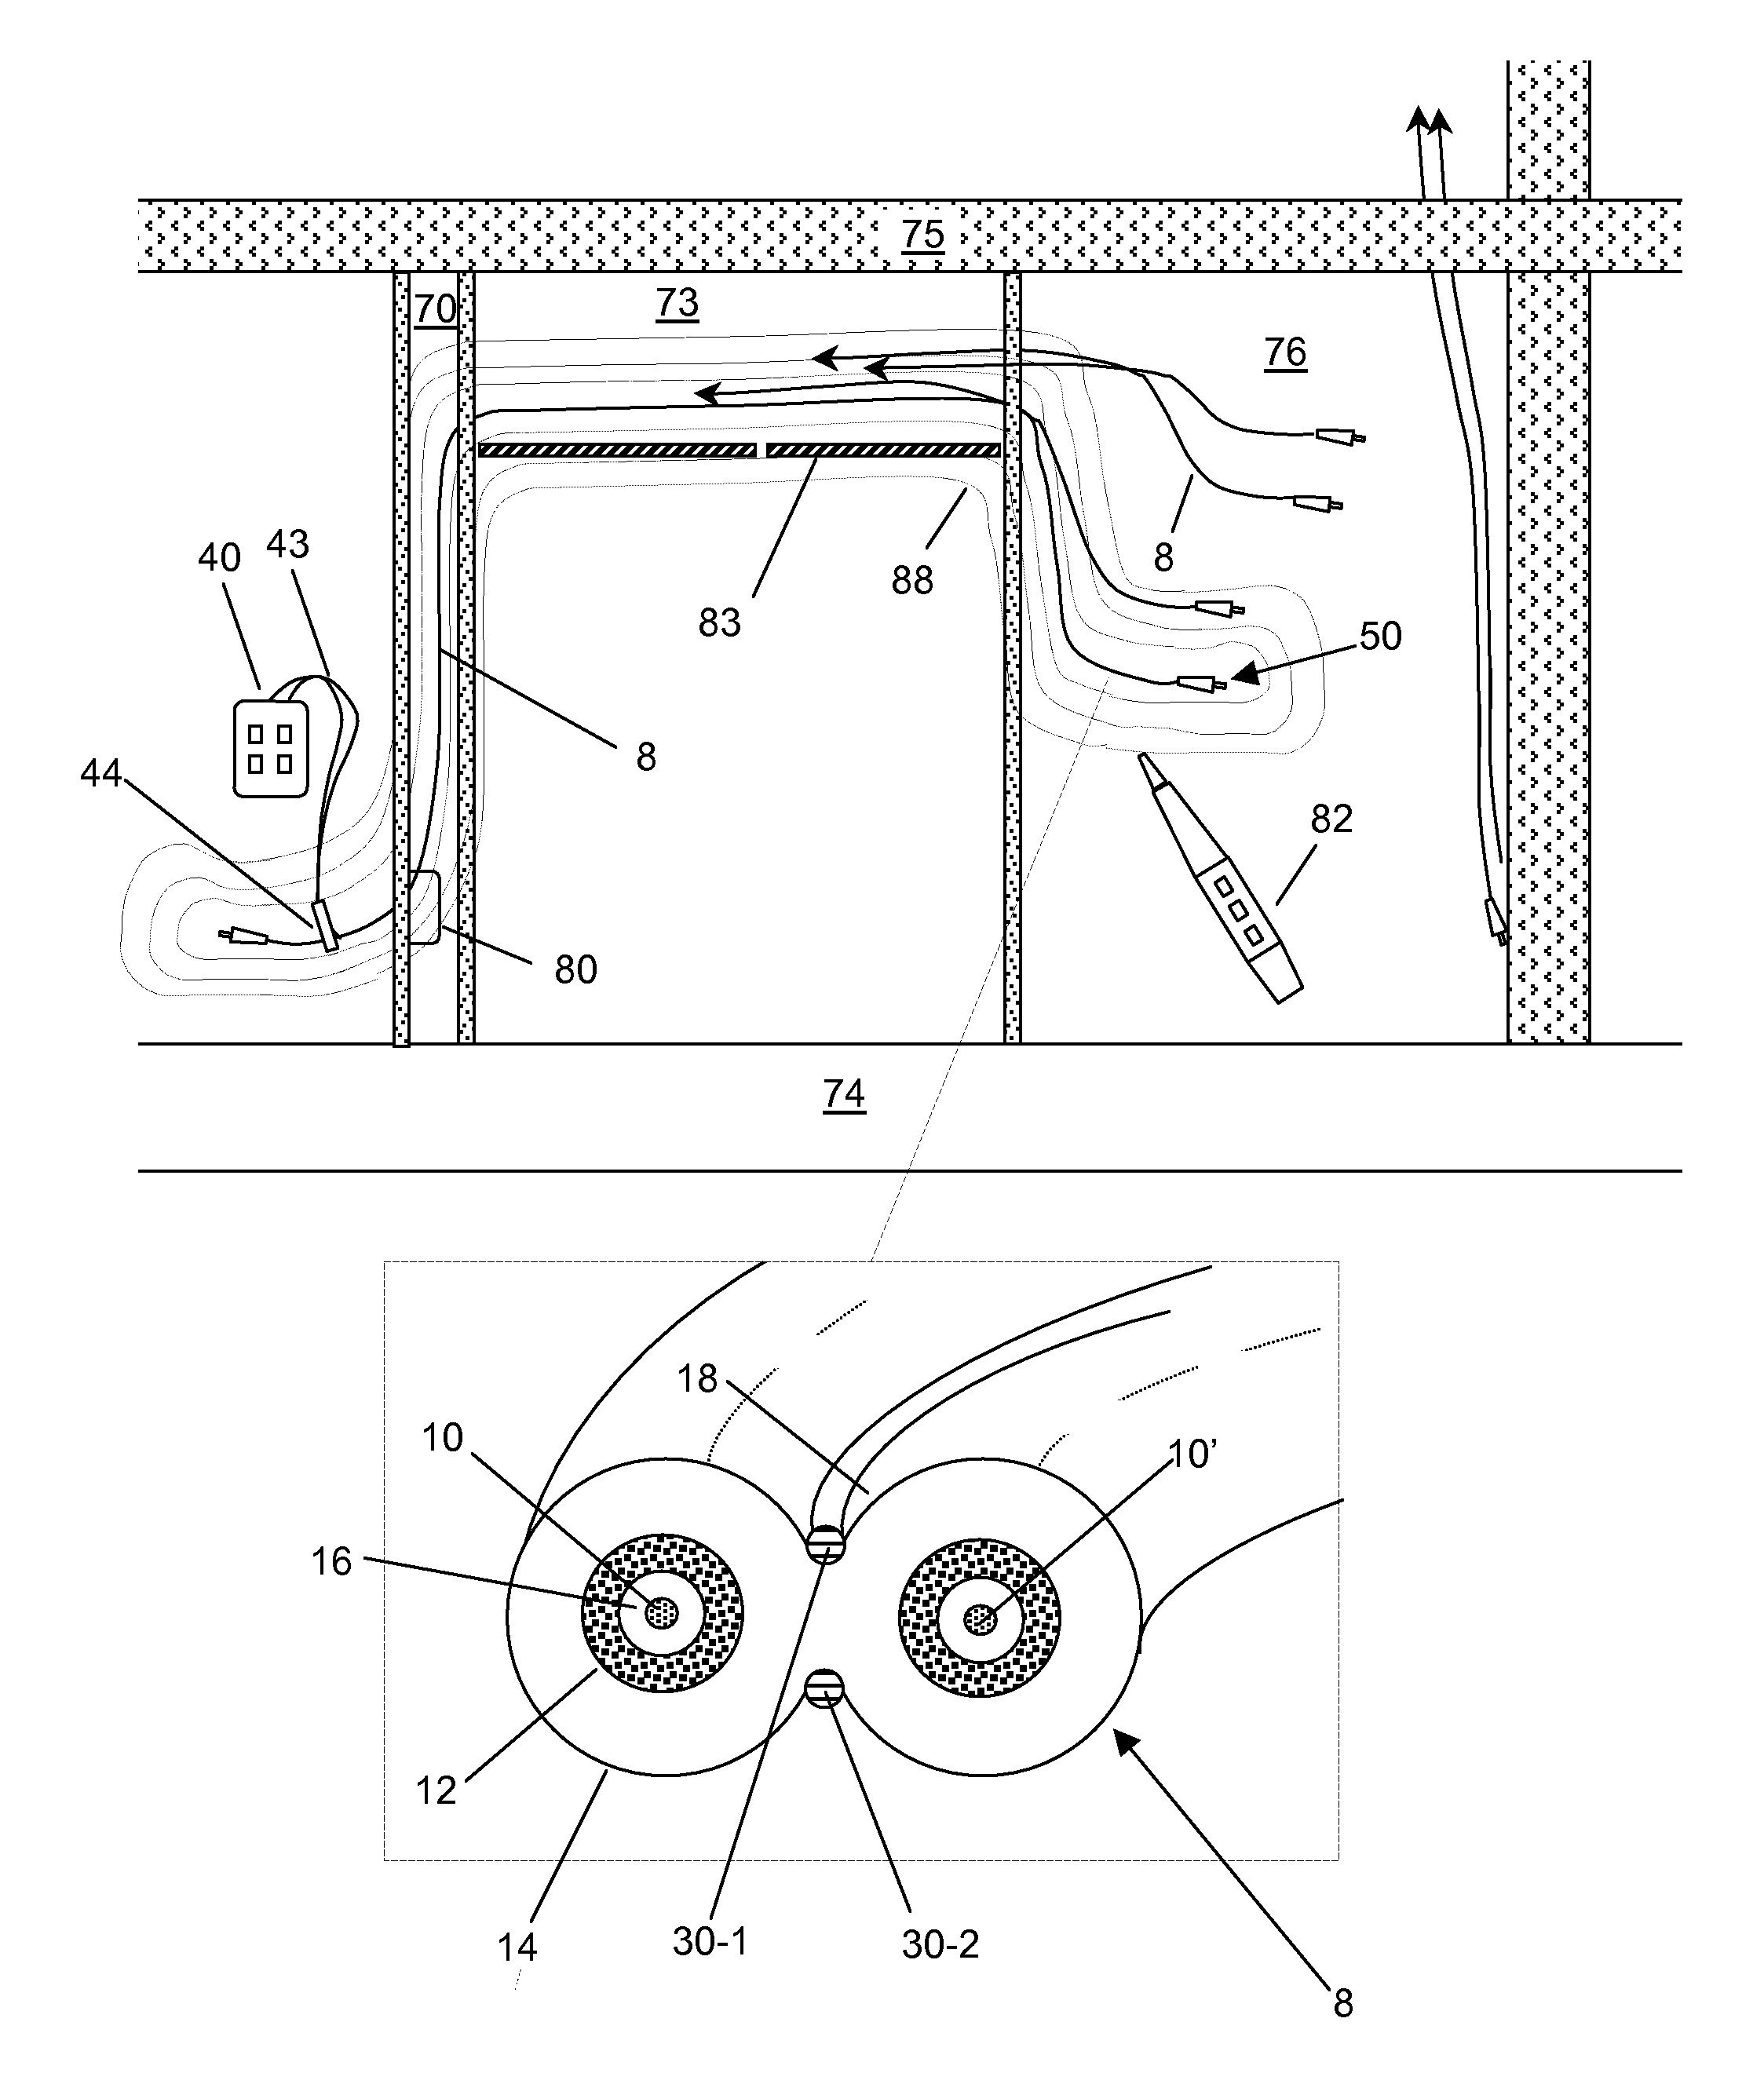 Electrically Traceable and Identifiable Fiber Optic Cables and Connectors